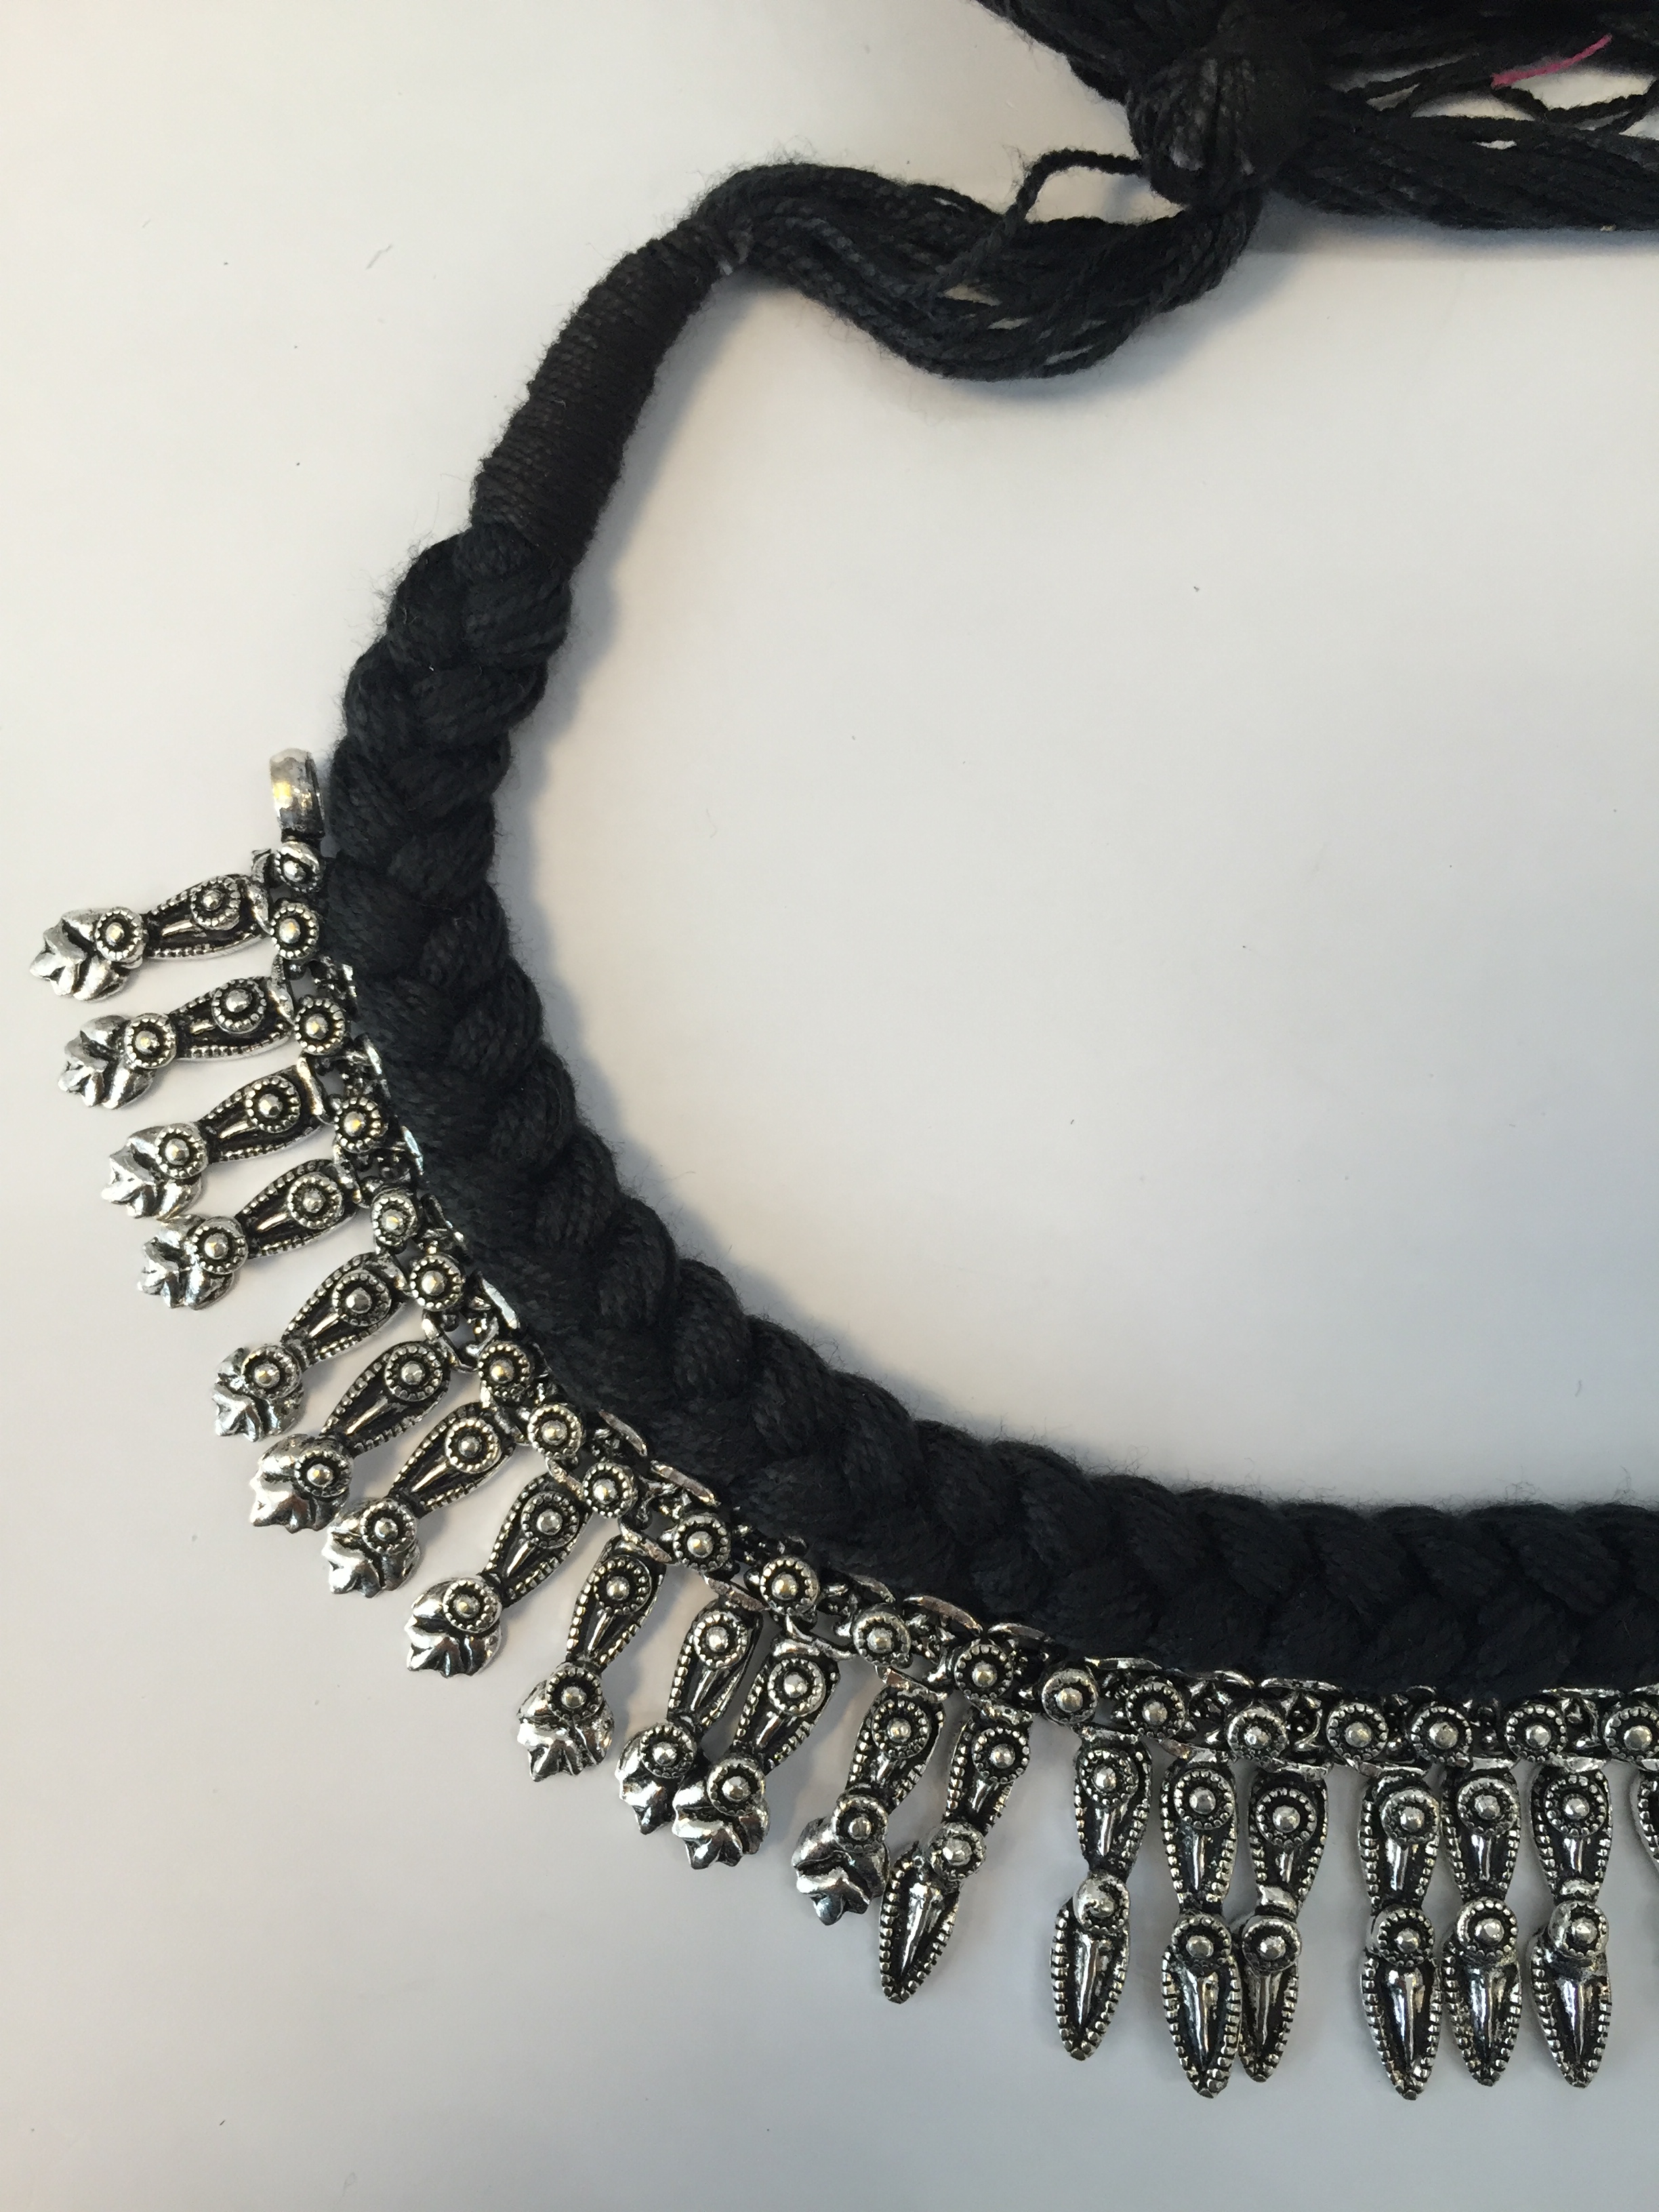 TIBETAN STYLE .925 SILVER JEWELRY NECKLACE SIZE 17-18 INCHES WITH BLACK THREAD - Image 2 of 2